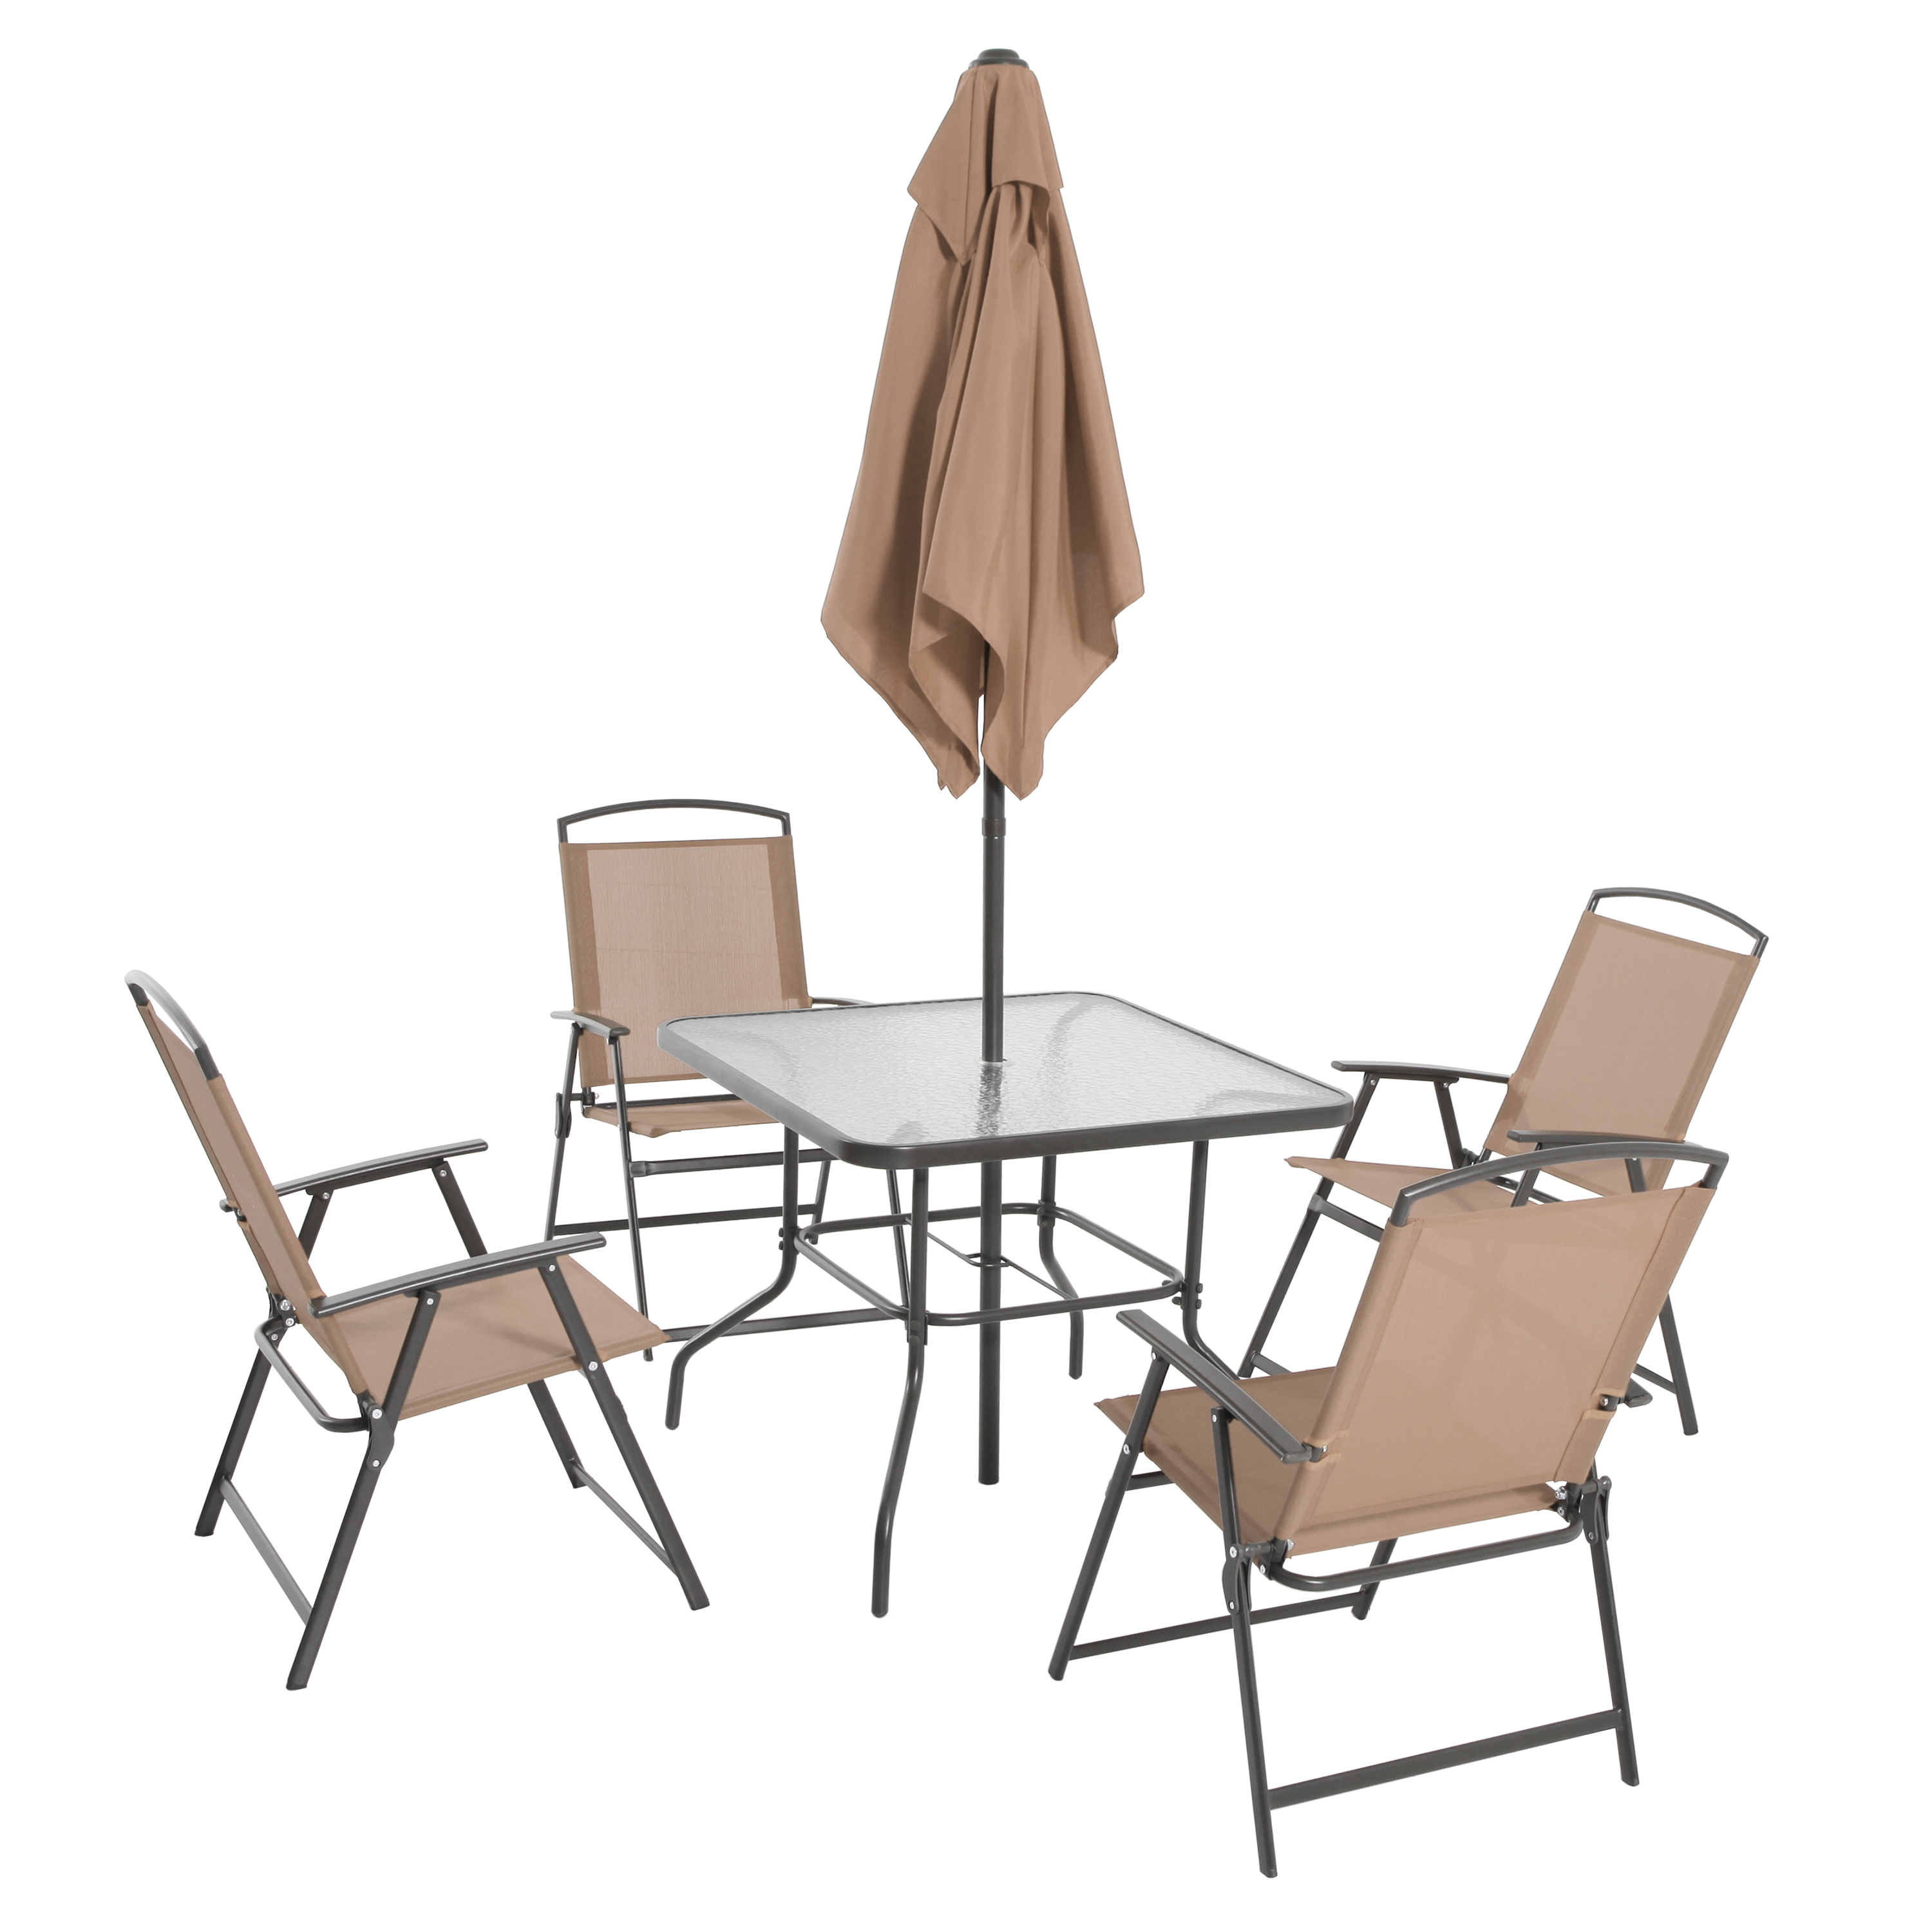 Mainstays Albany Lane Steel Outdoor Patio Dining Set of 6, Tan - image 3 of 17